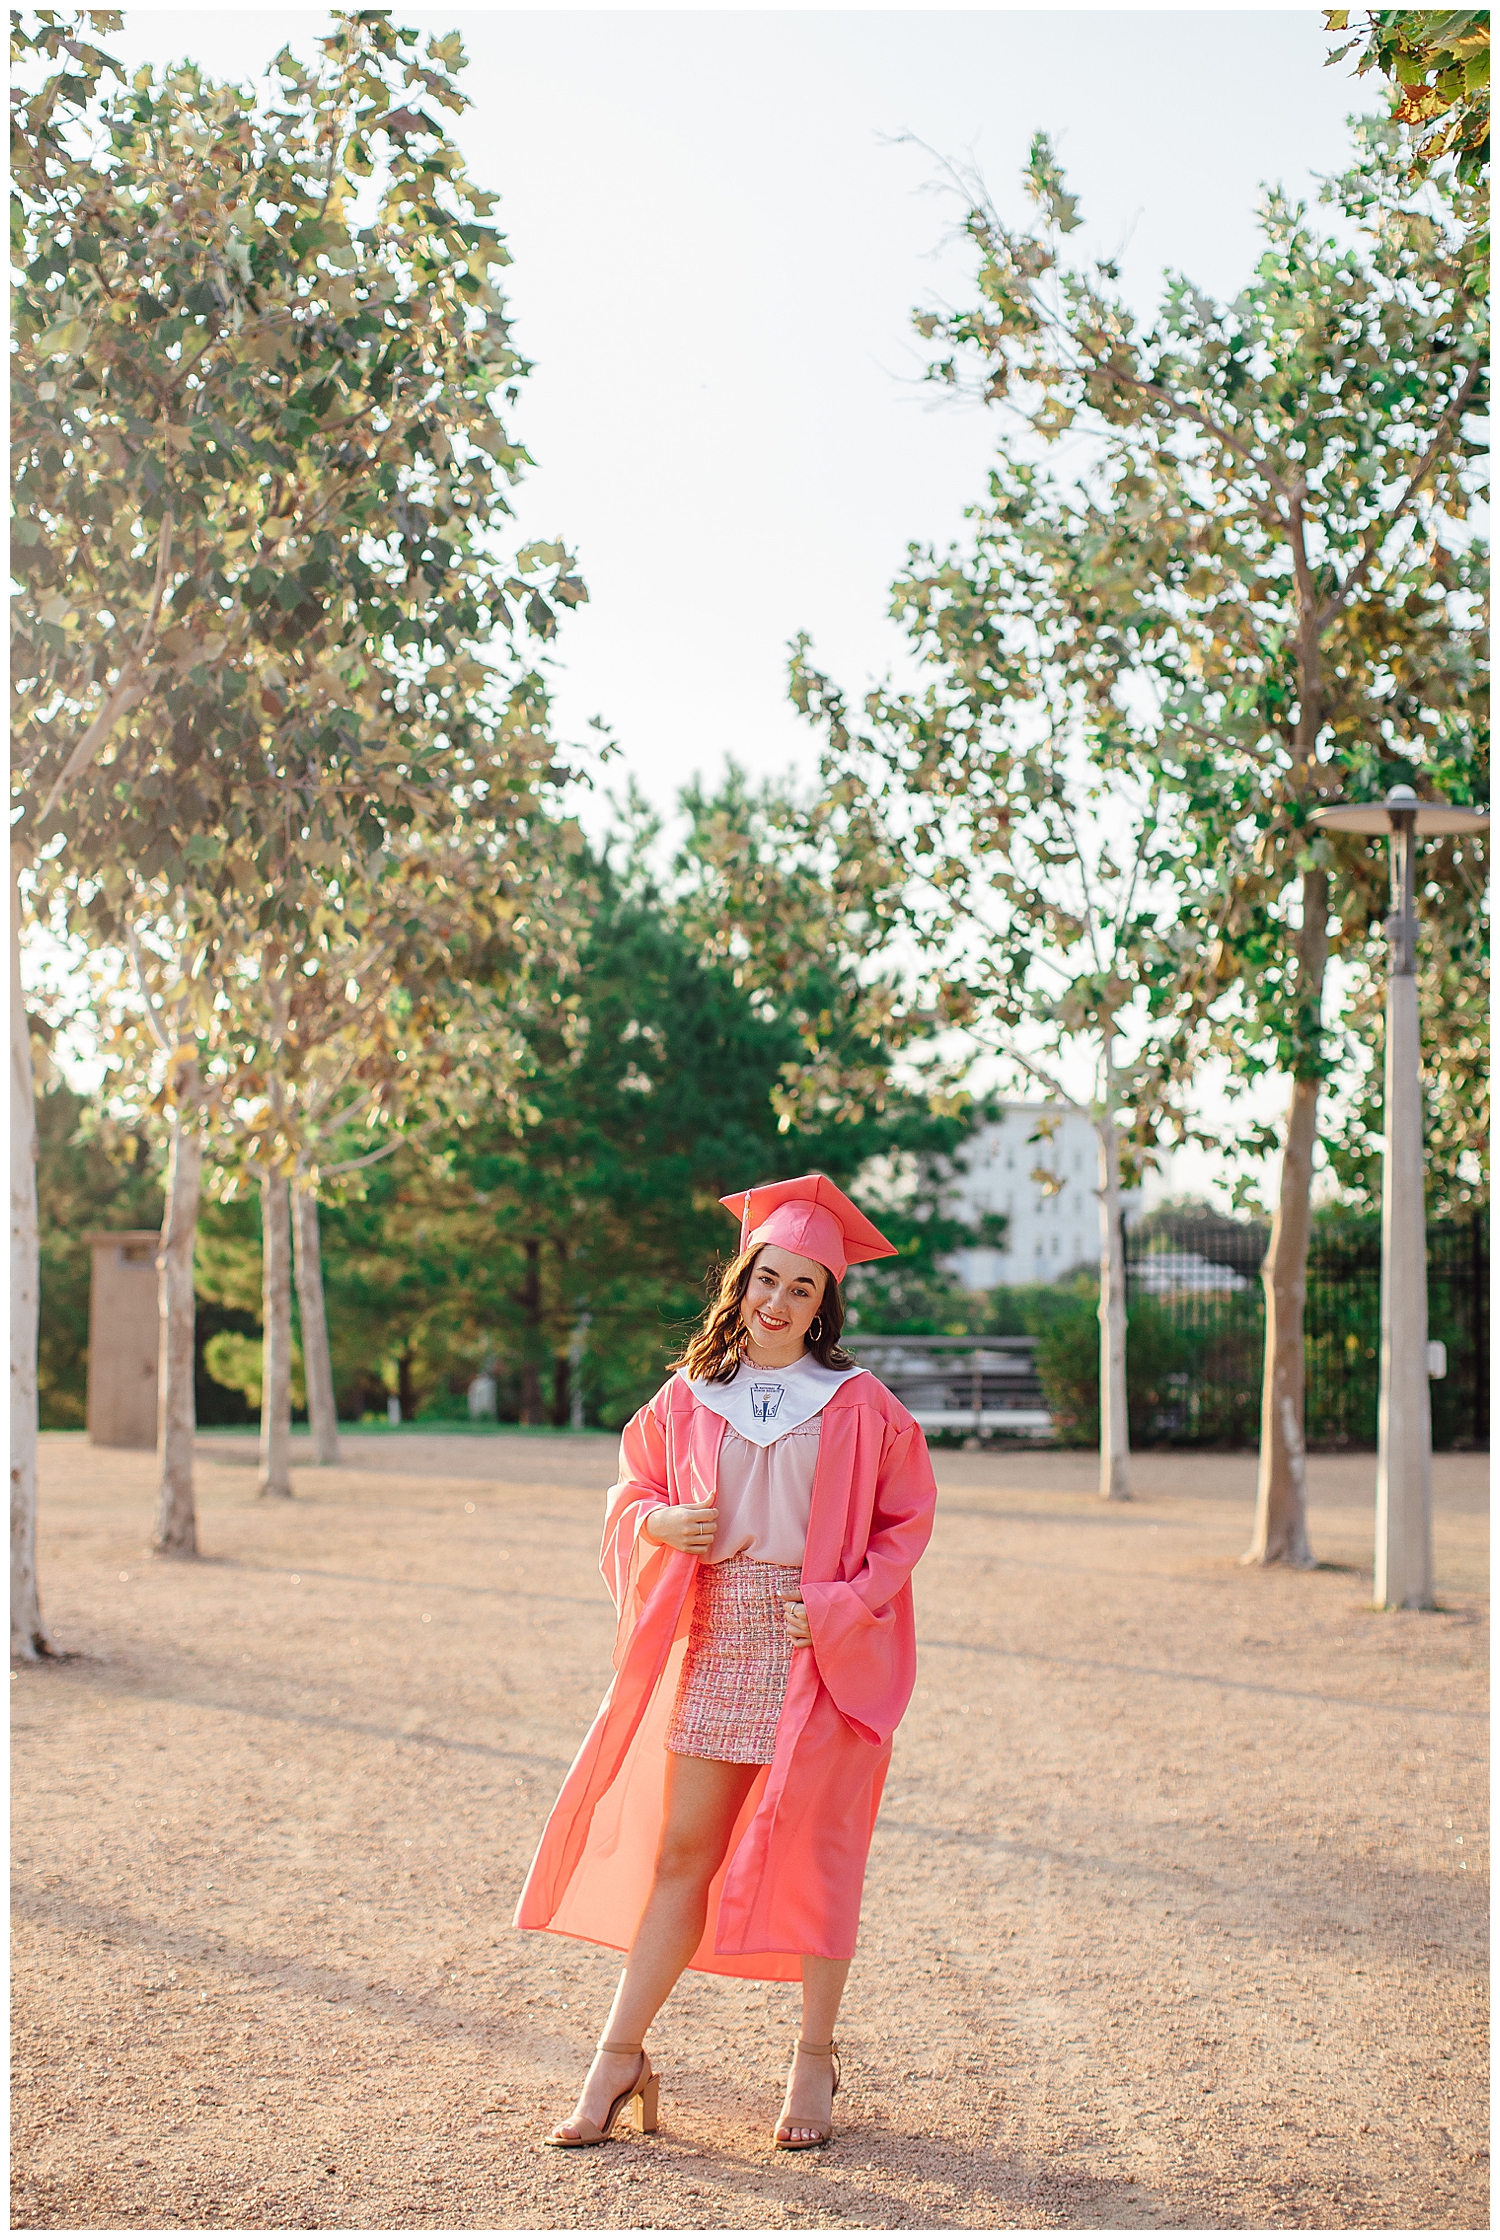 Houston skyline senior photos with girl in pink cap and gown walking by treeline